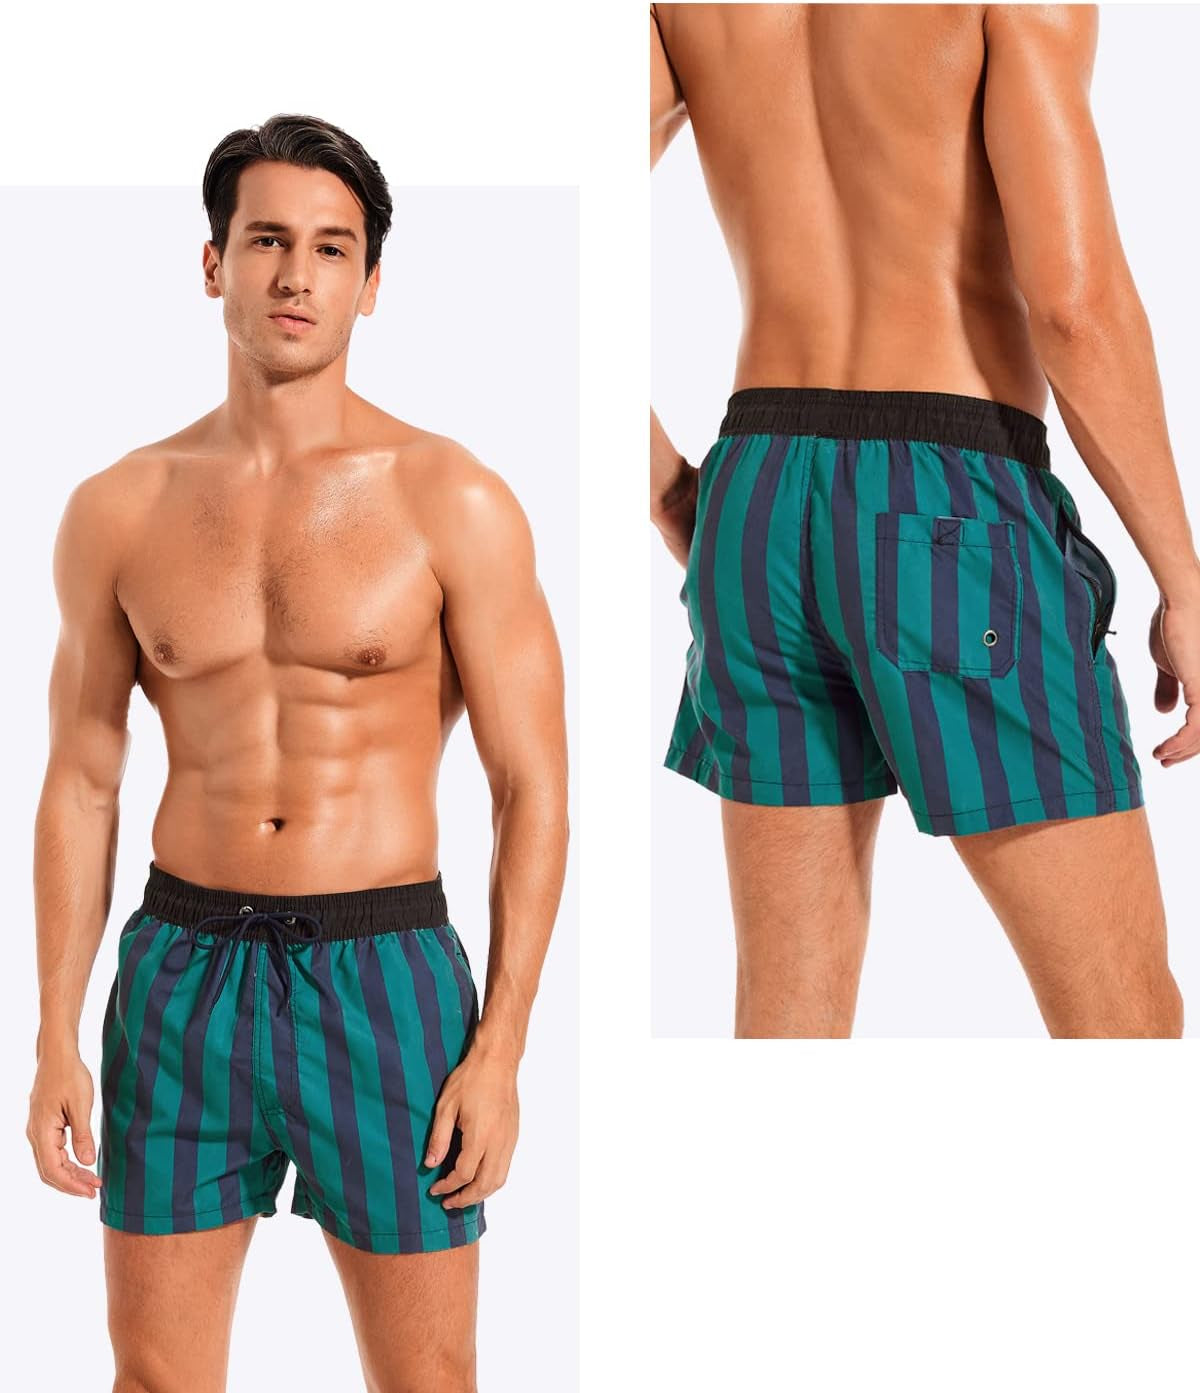 Mens 9" Swimming Trunks Quick Dry Swim Shorts Bathing Suit with Liner